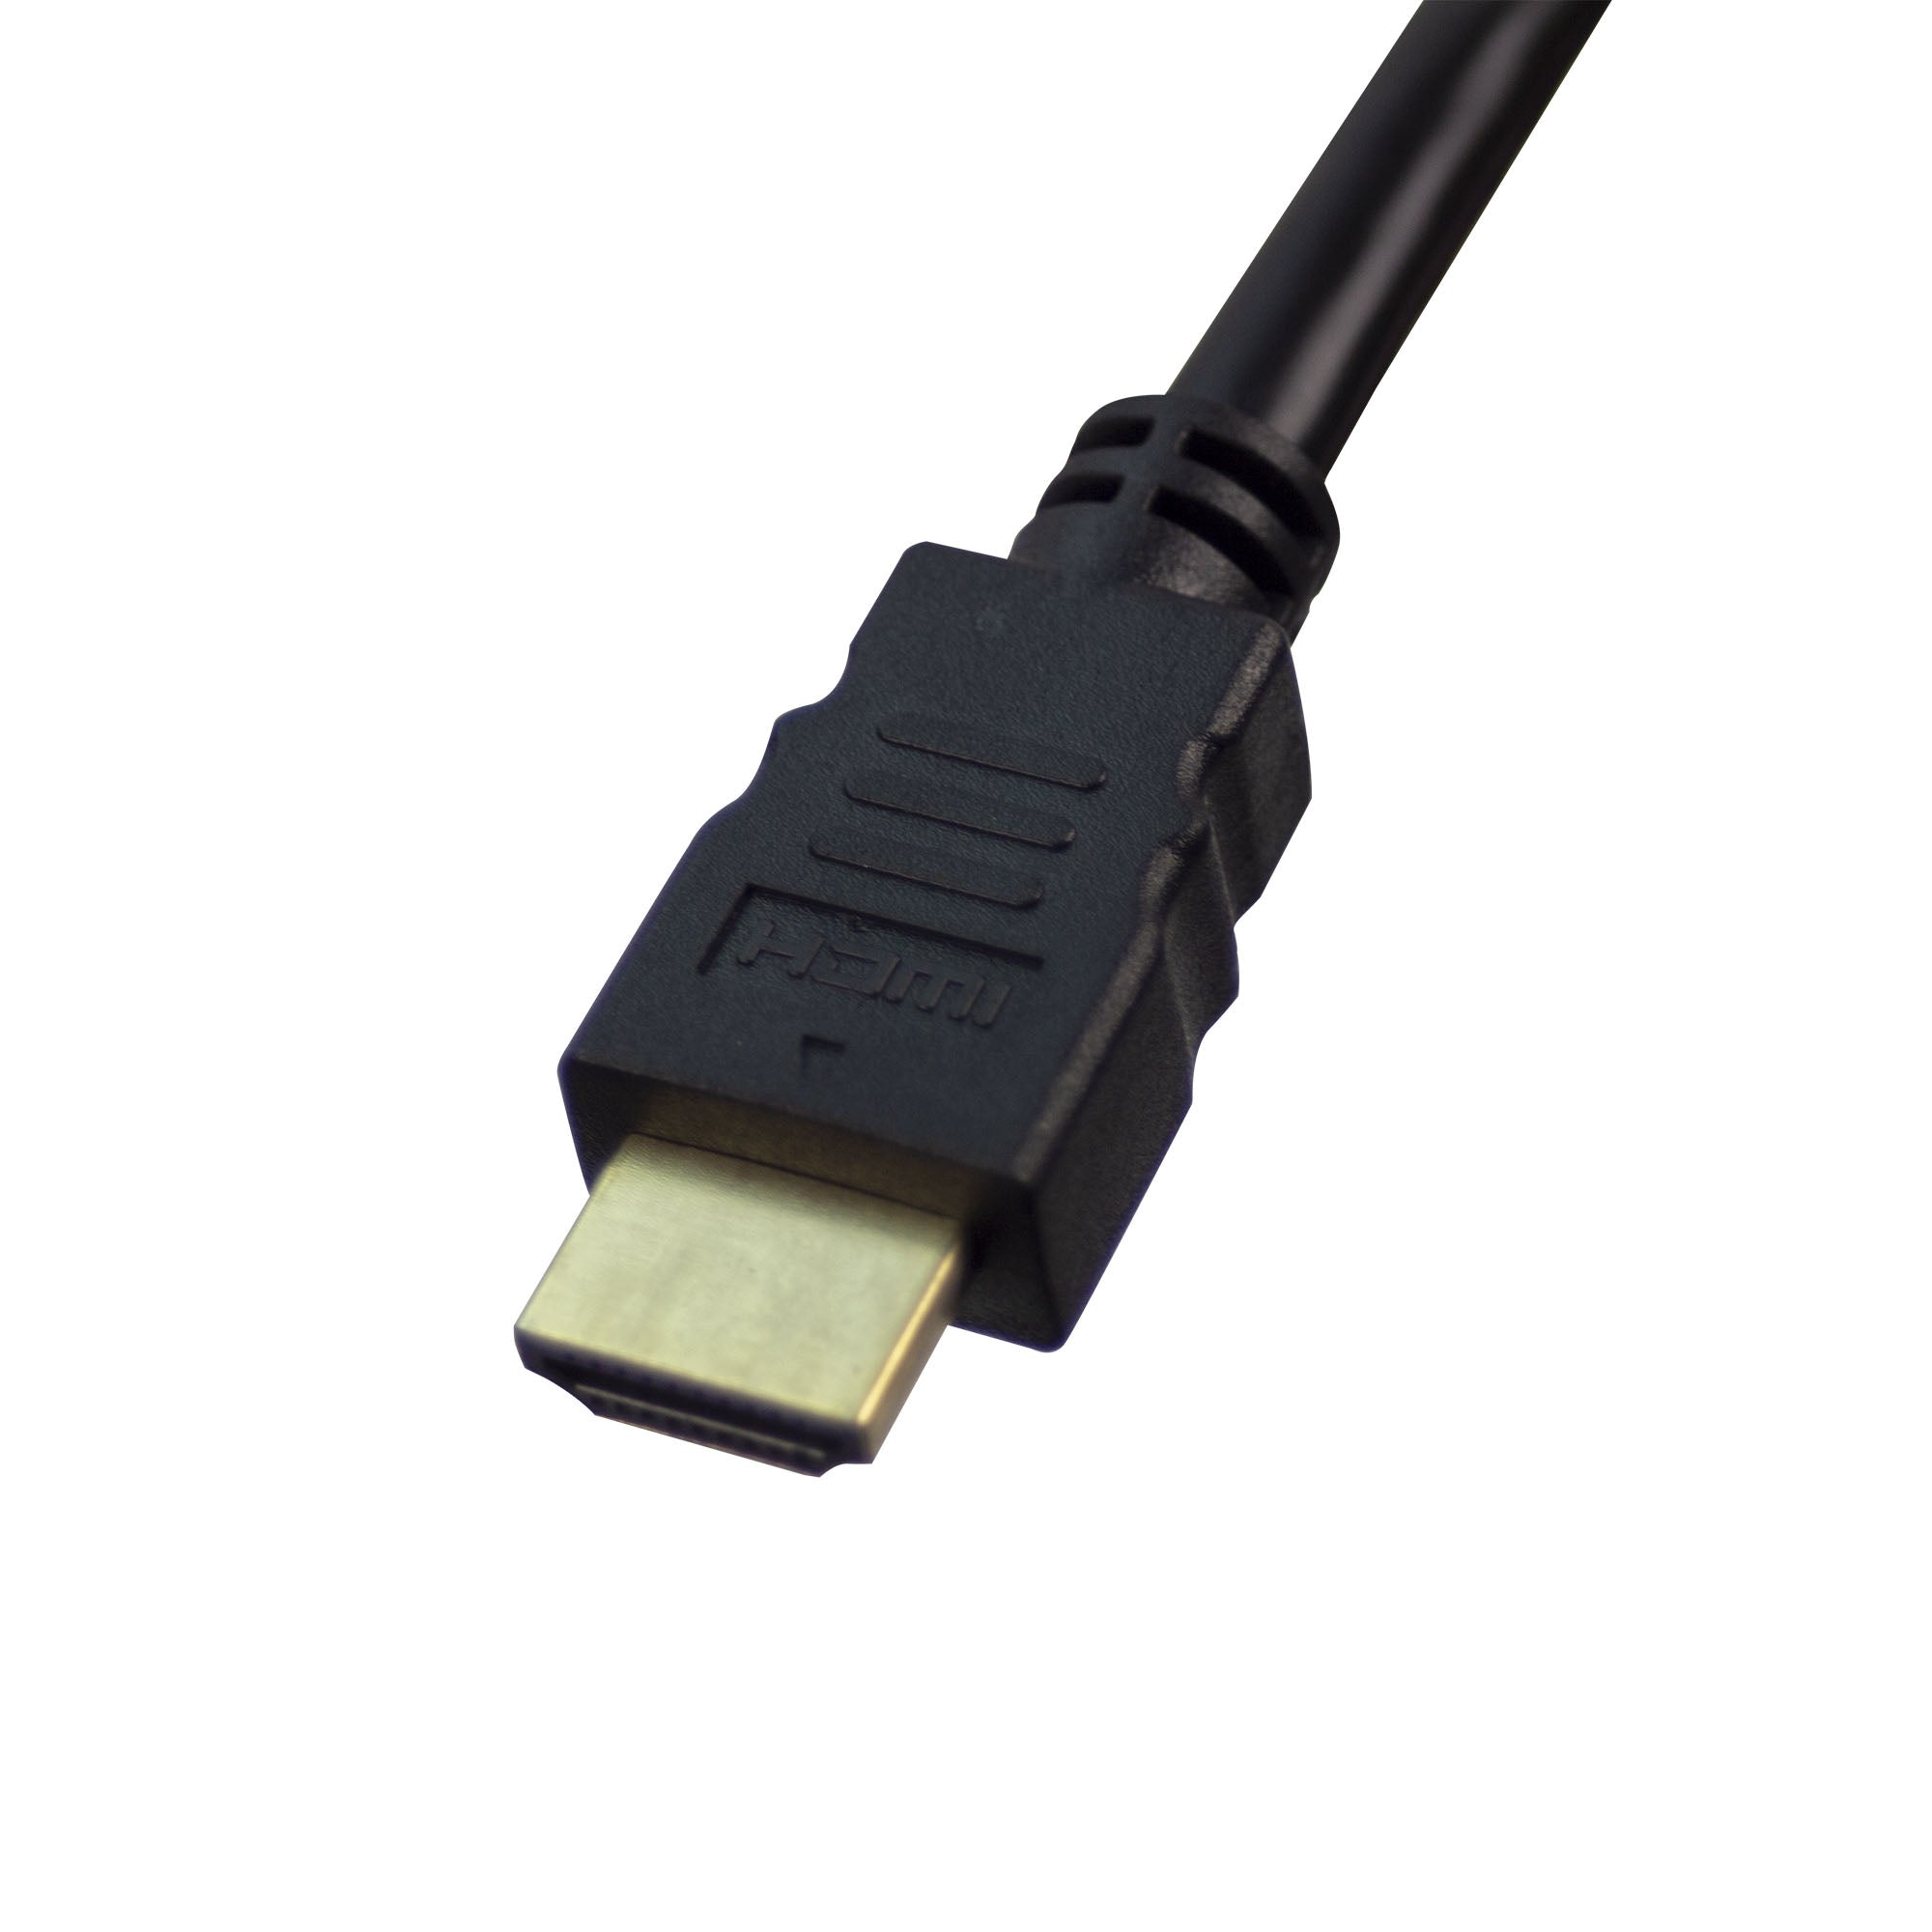 Cable Hdmi Stylos Stachd12905018 10Mts Stylos. Stacgd12905018